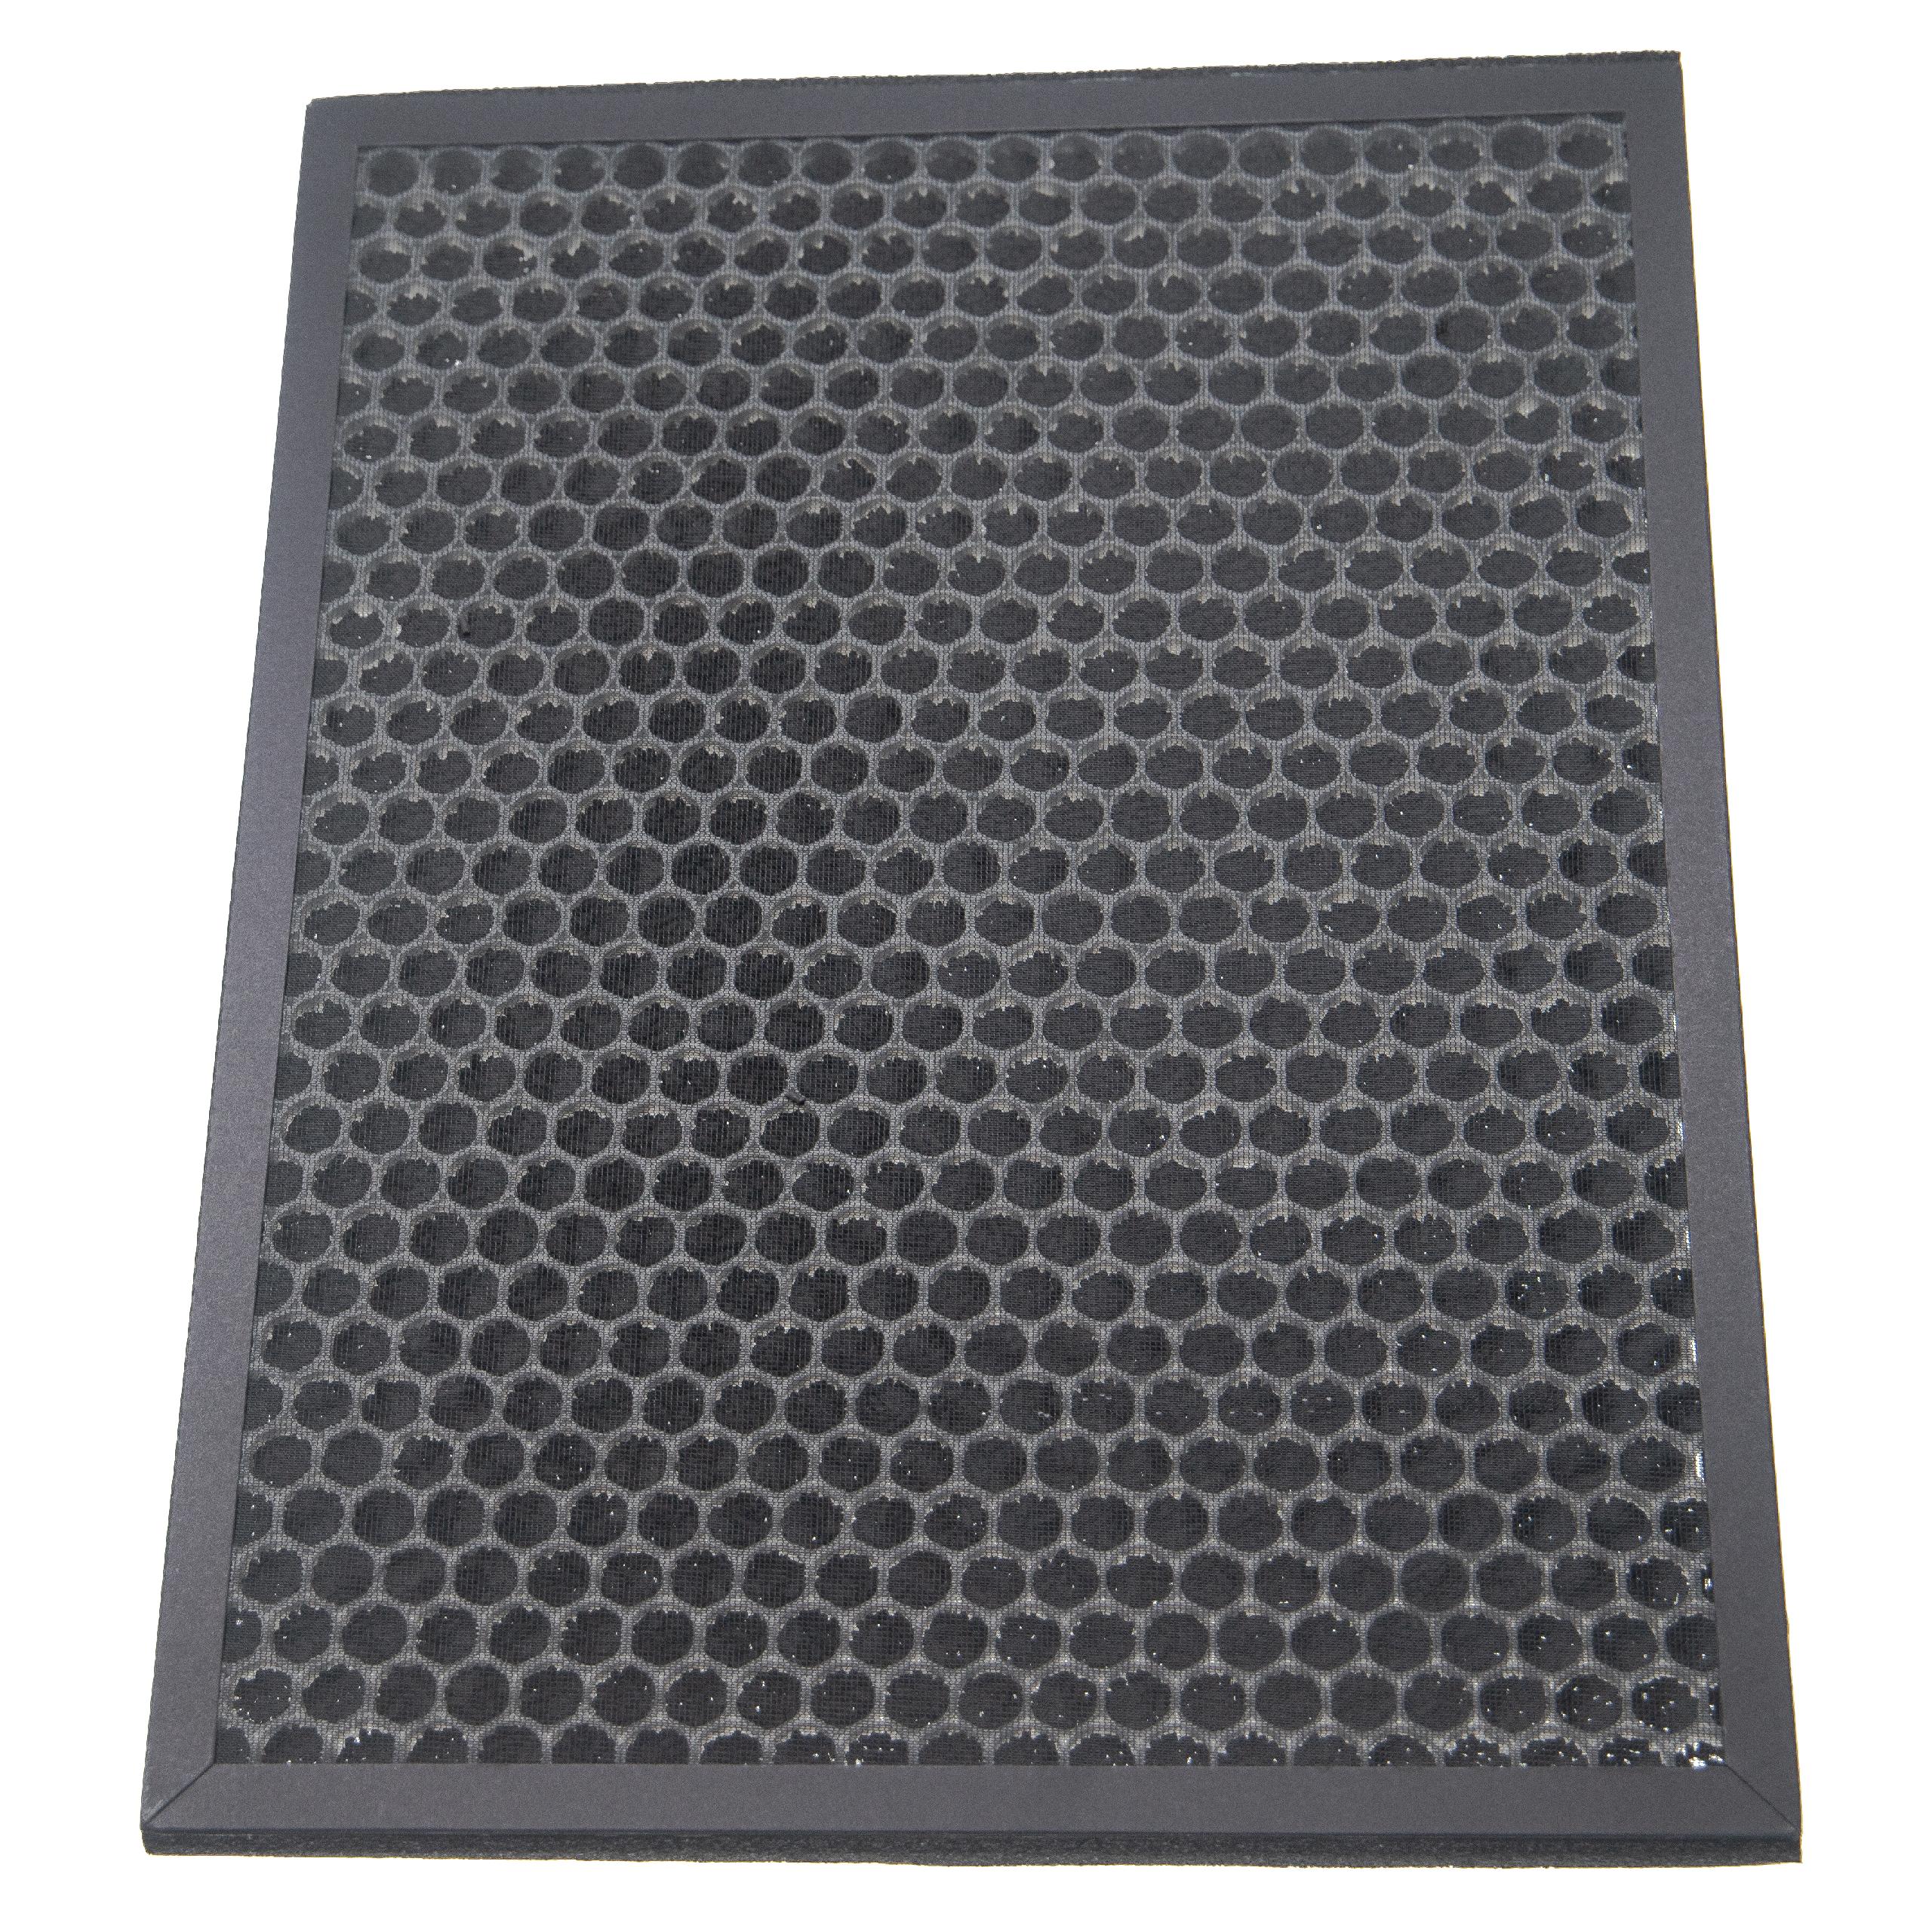 Activated Carbon Filter replaces Philips FY3432/10 for Philips Air Purifier - Air Filter